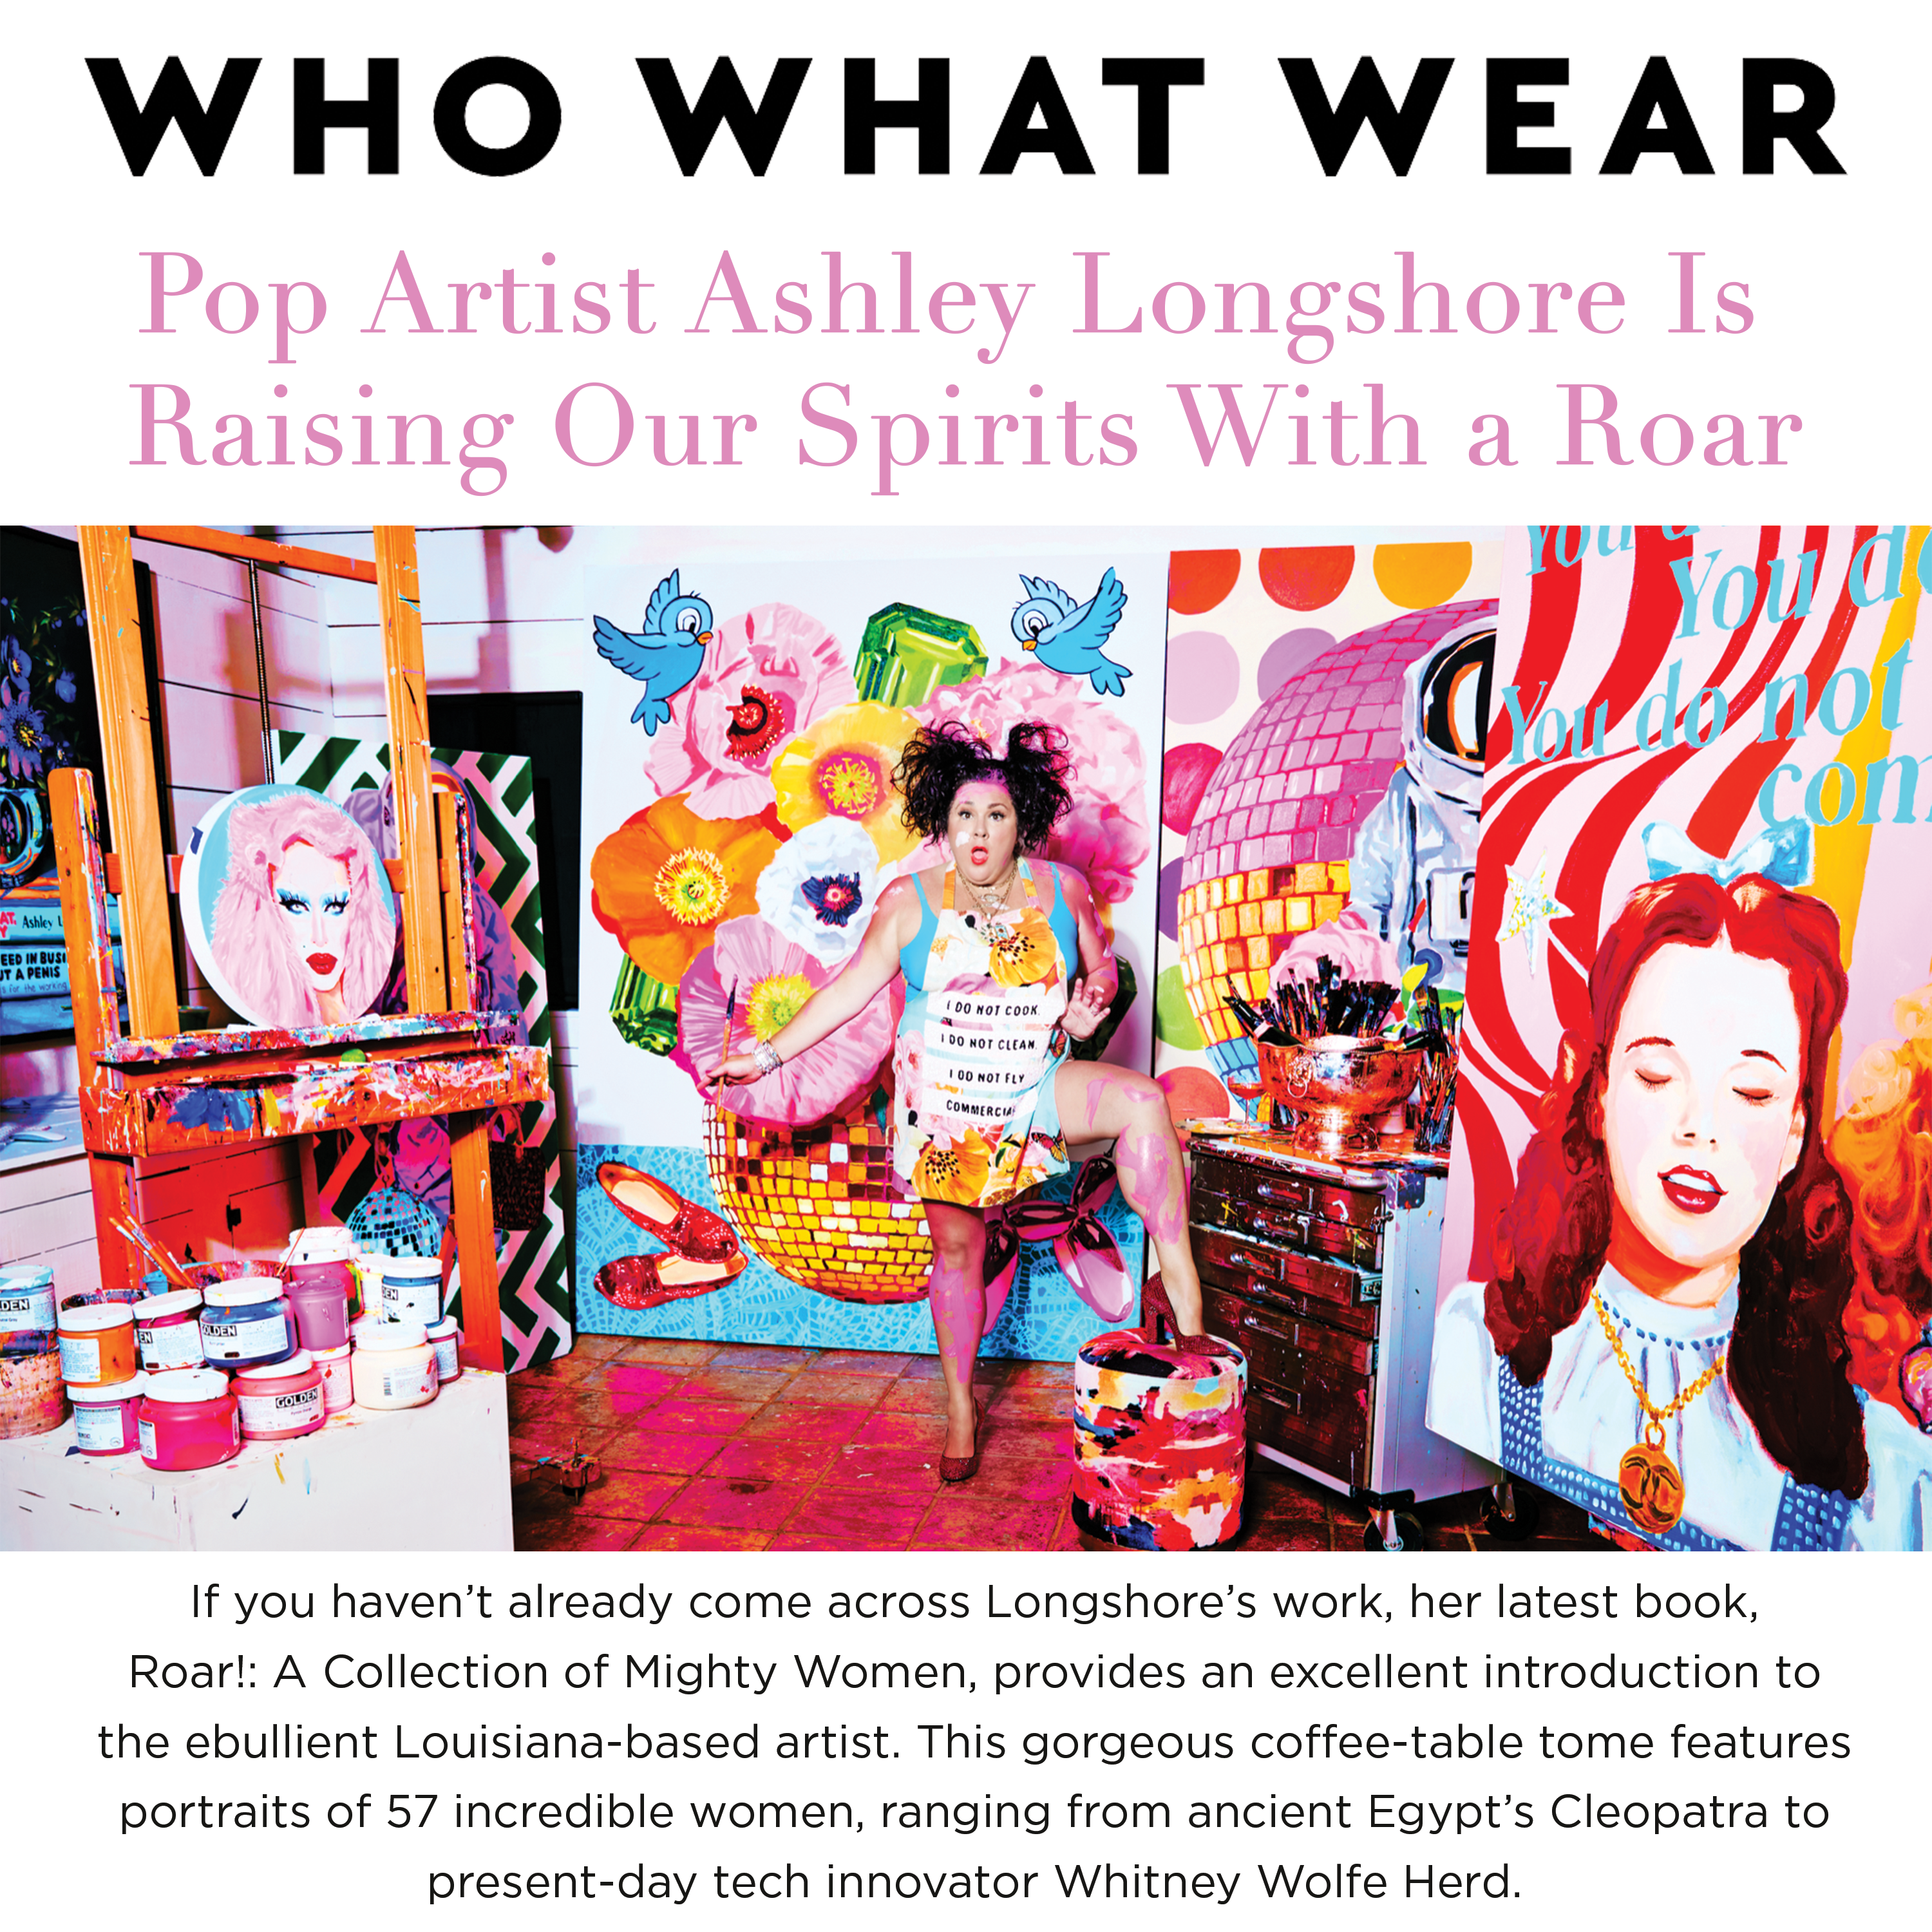 WHO WHAT WEAR: Pop Artist Ashley Longshore Is Raising Our Spirits With a Roar